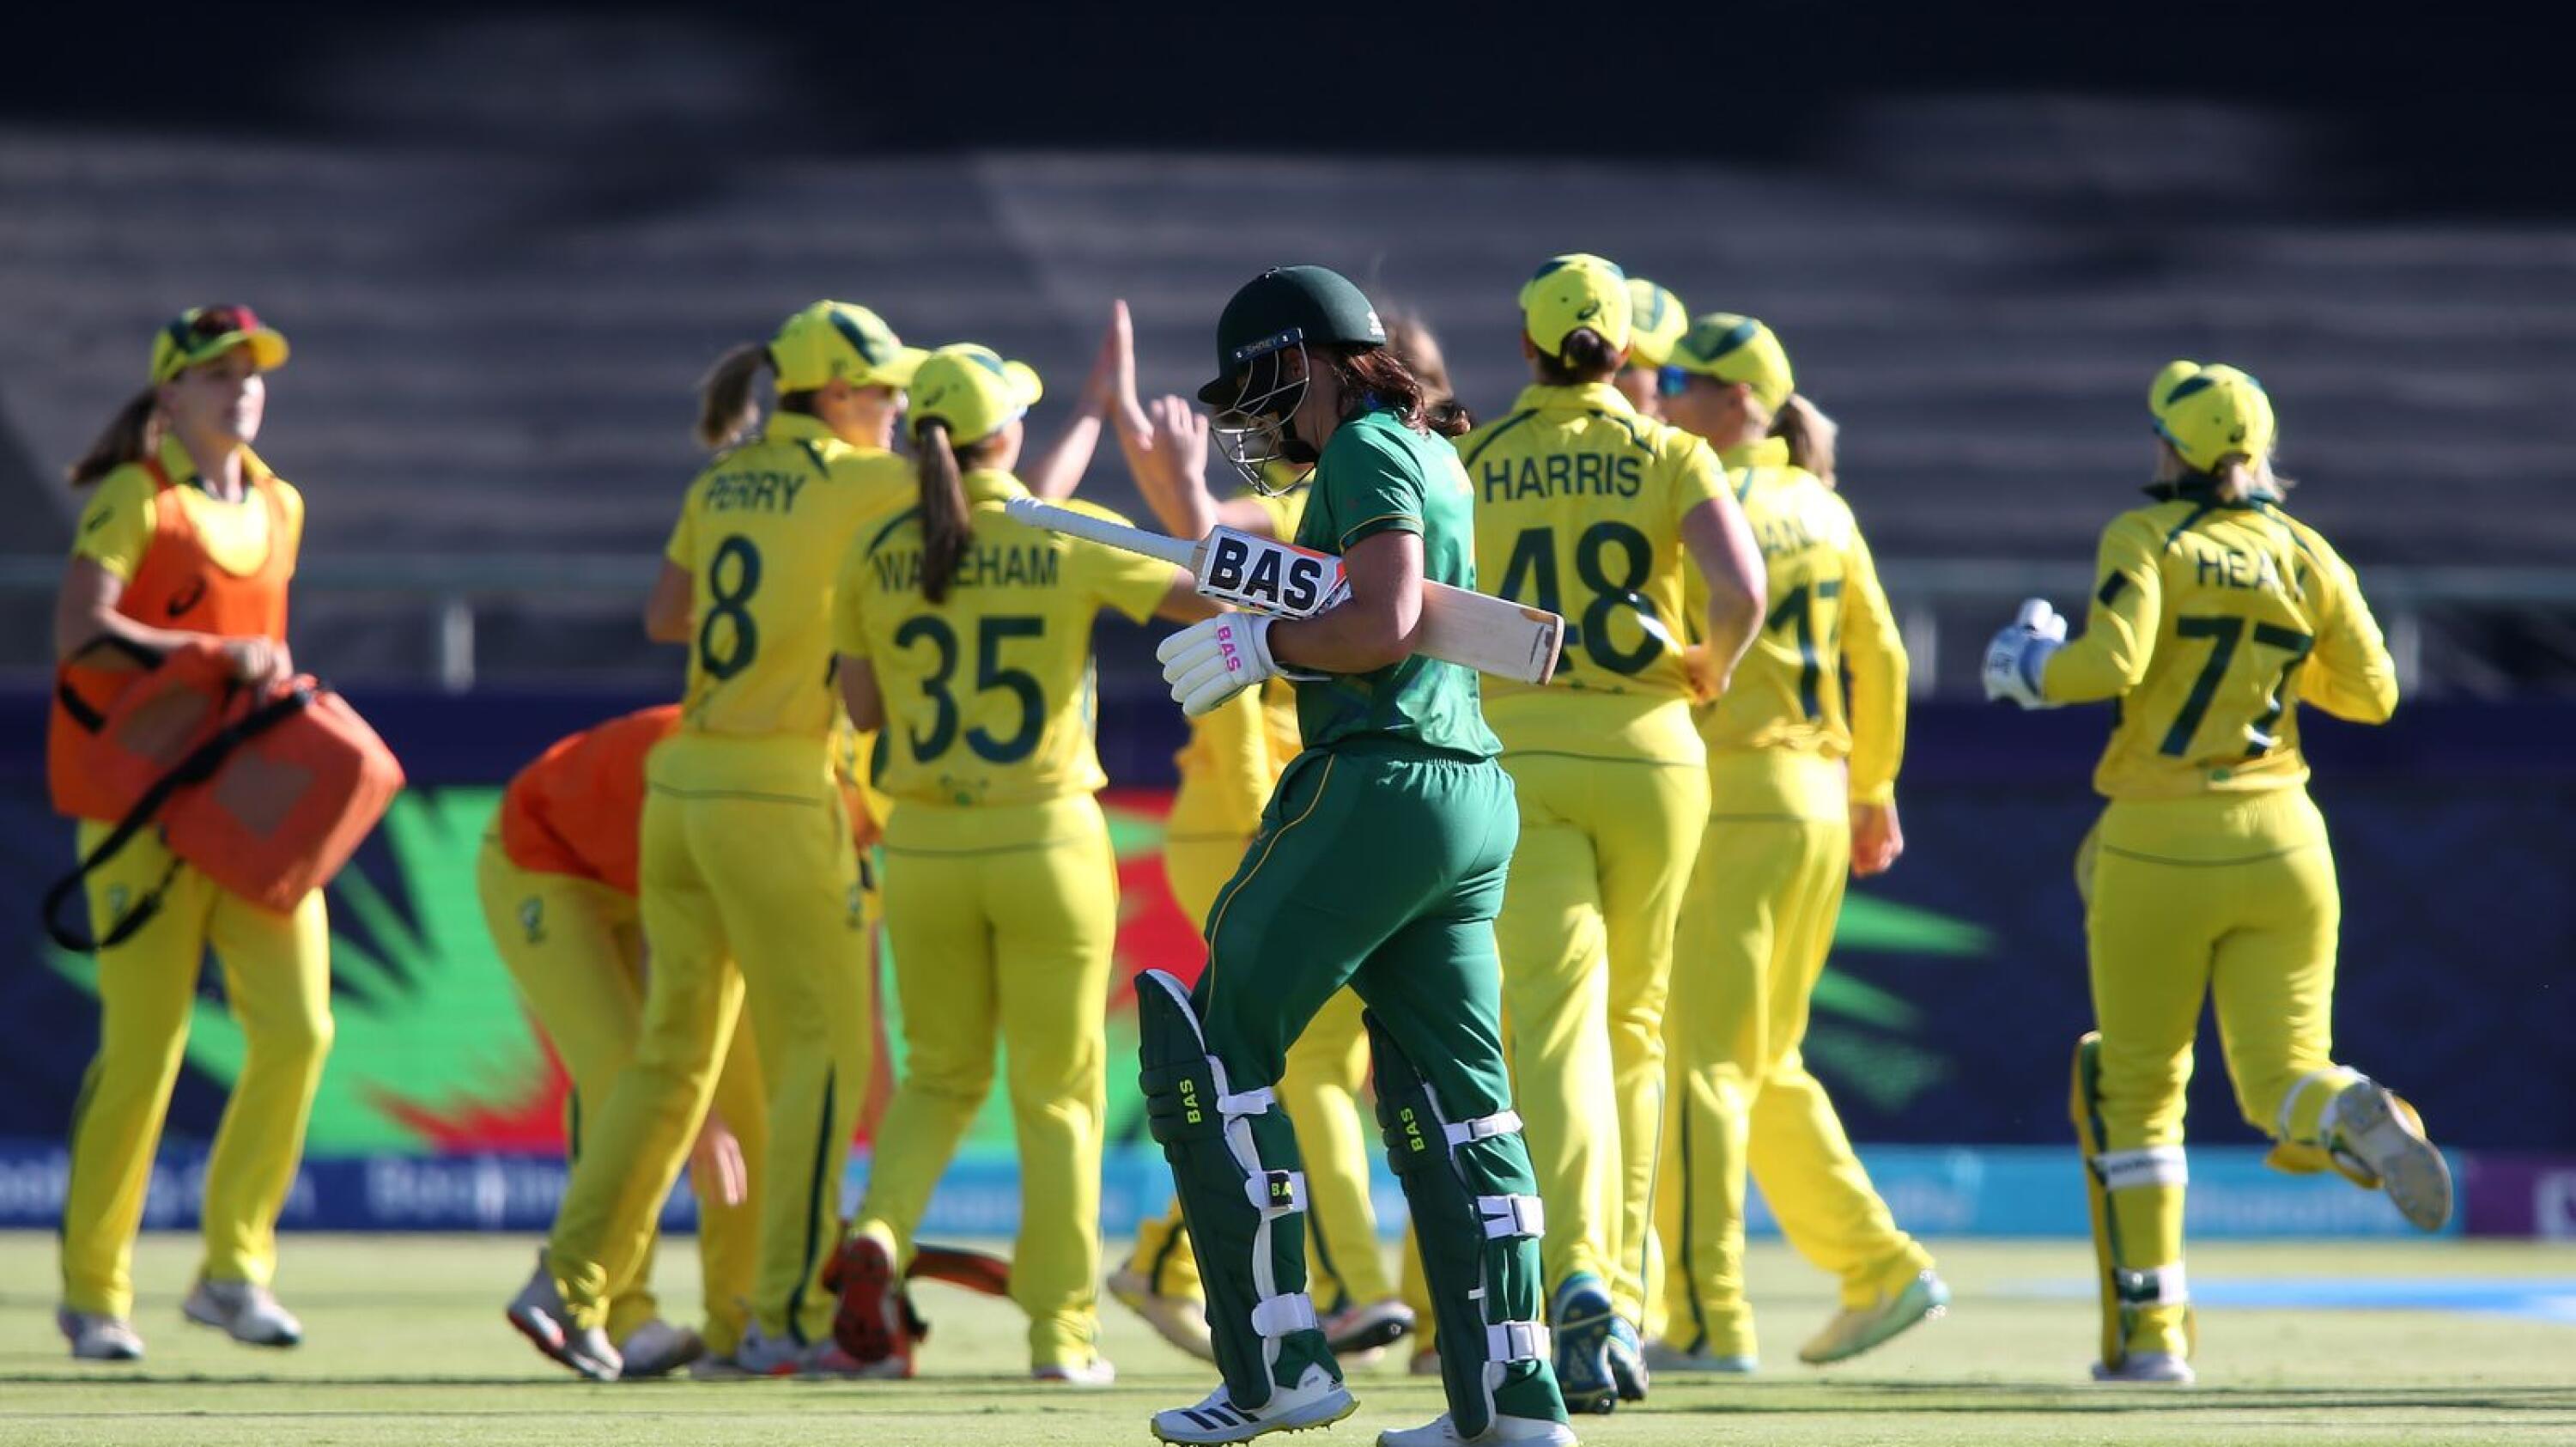 Tazmin Brits of South Africa leaves the field after losing her wicket as Australia celebrate during the 2023 ICC Women's T20 World Cup Final at Newlands Cricket Ground in Cape Town on Sunday